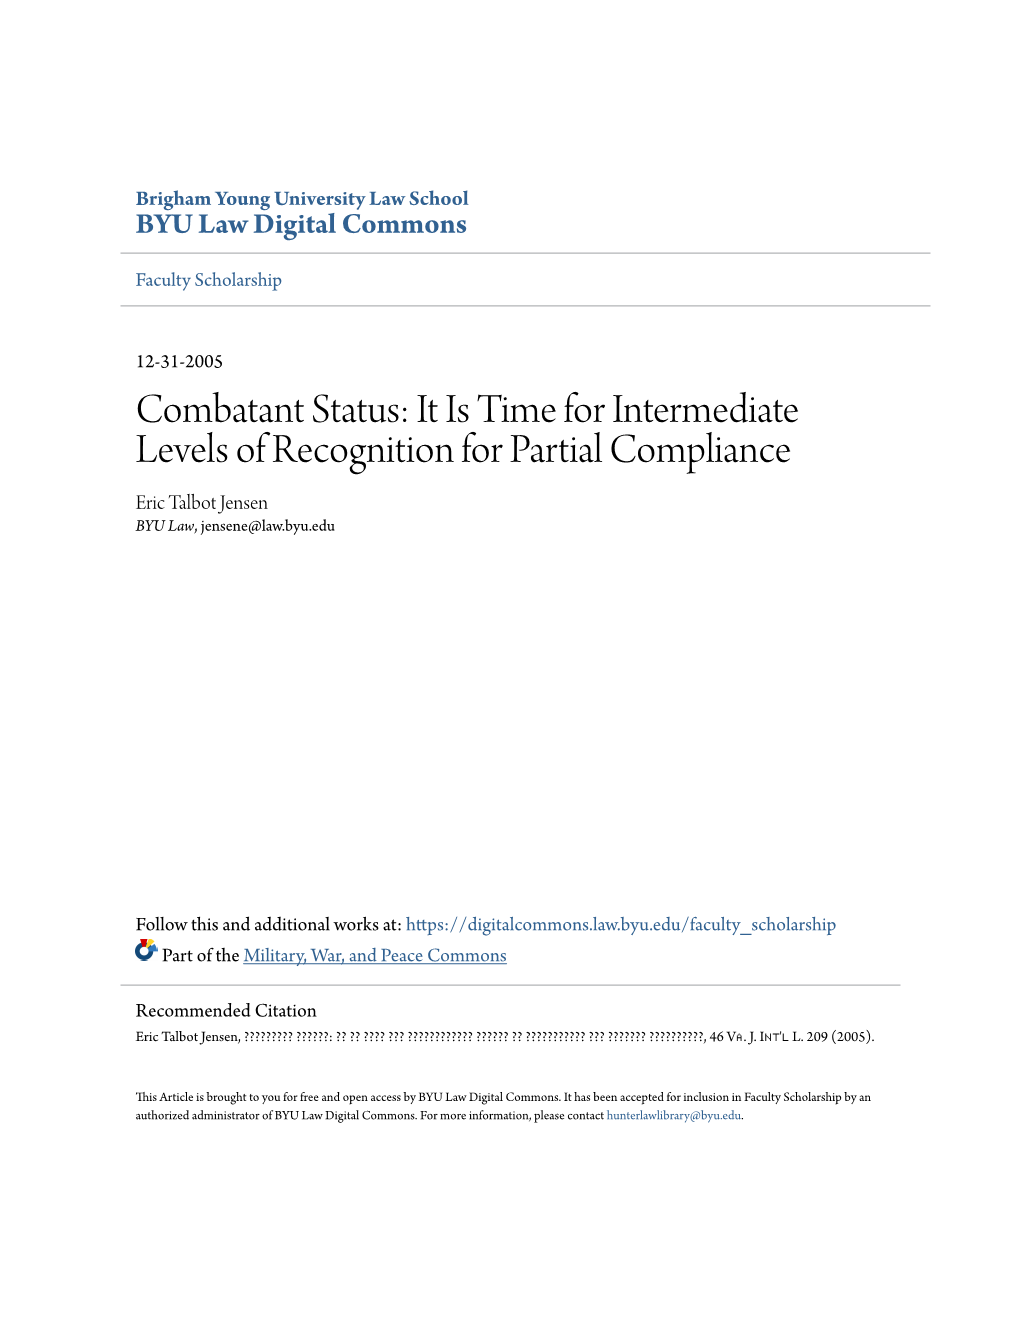 Combatant Status: It Is Time for Intermediate Levels of Recognition for Partial Compliance Eric Talbot Jensen BYU Law, Jensene@Law.Byu.Edu